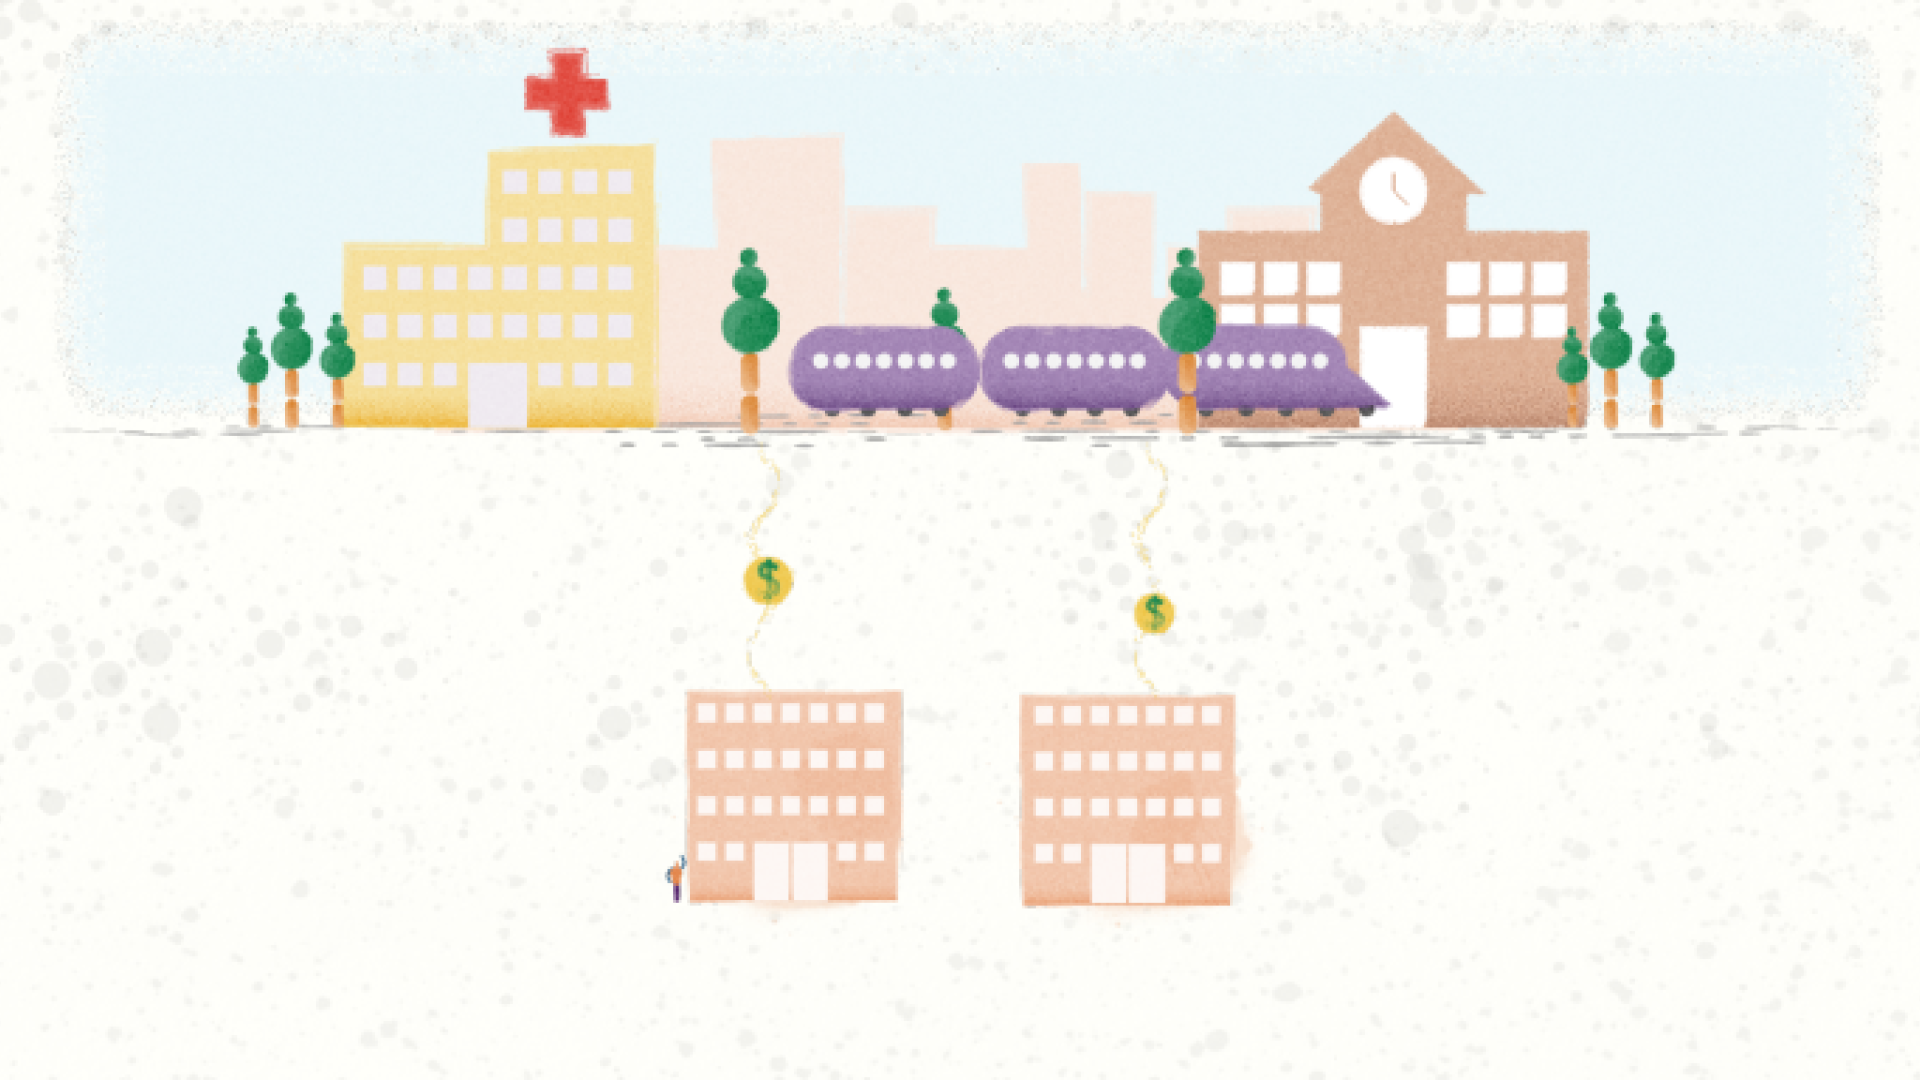 An image showing dollar signs moving from buildings to a hospital, school and transport